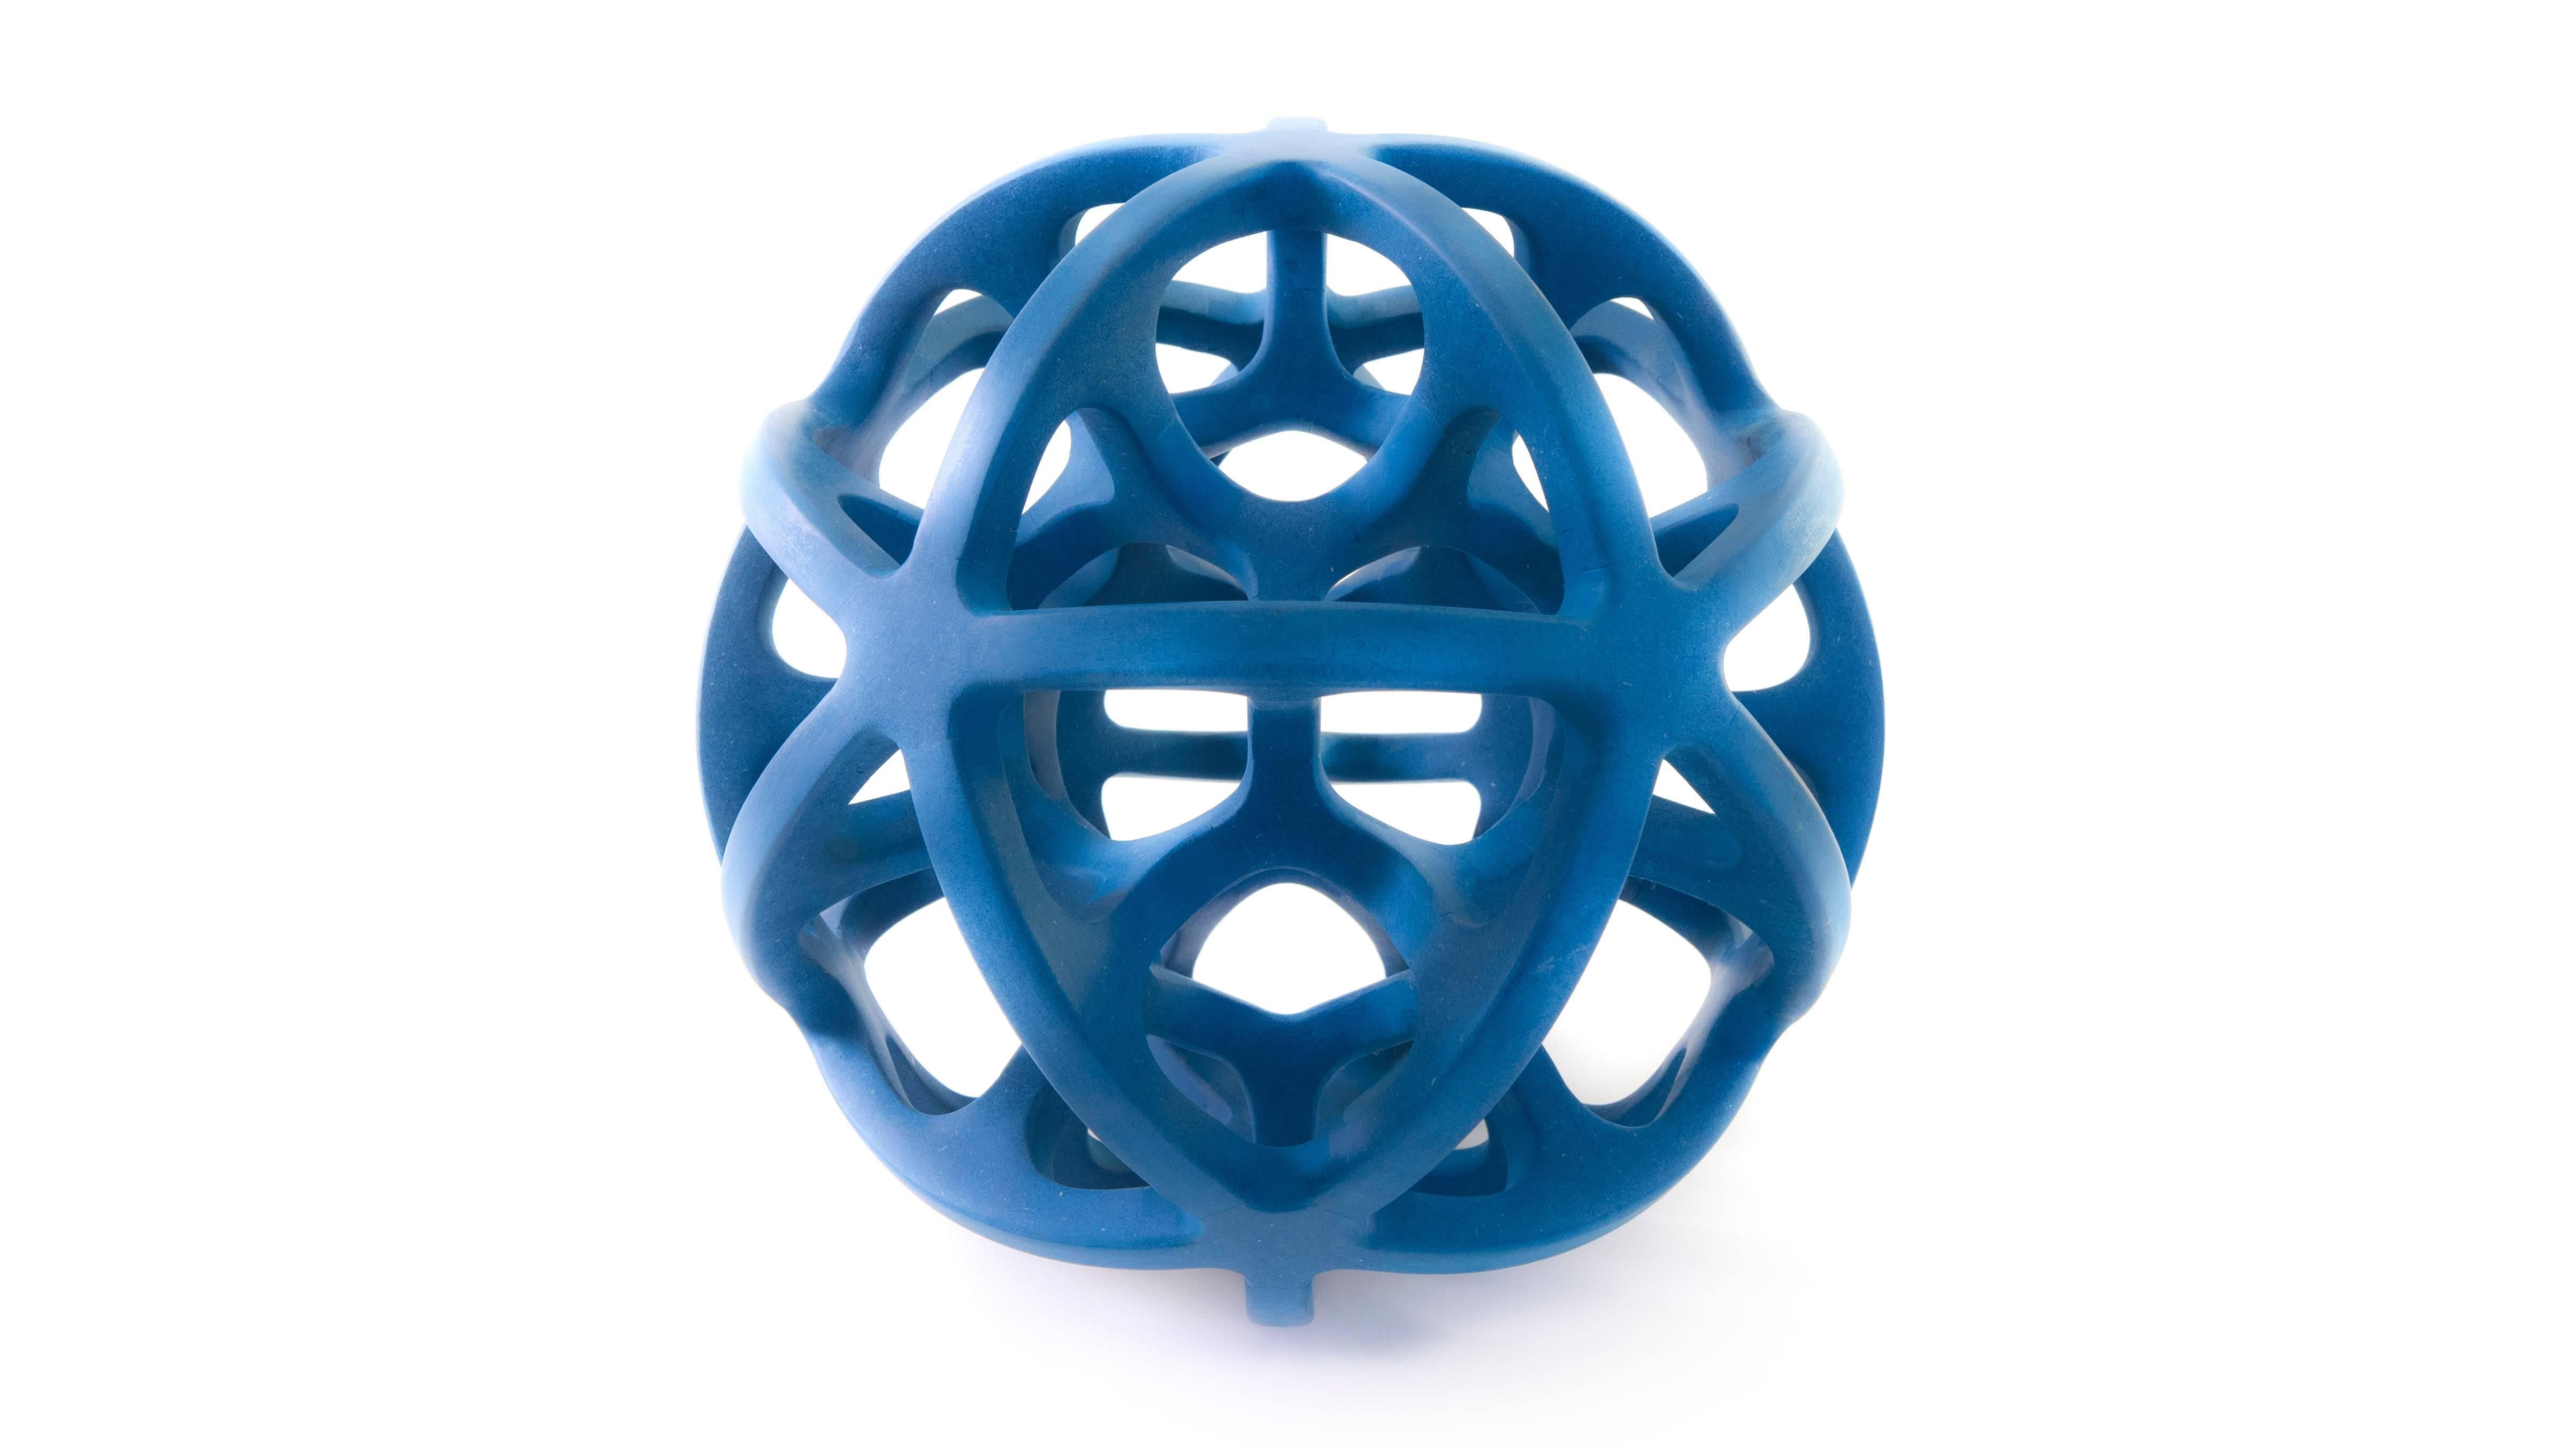 Other Contemporary Mexican Geometric Dual Icosahedron Handcrafted Sphere Sculpture For Sale